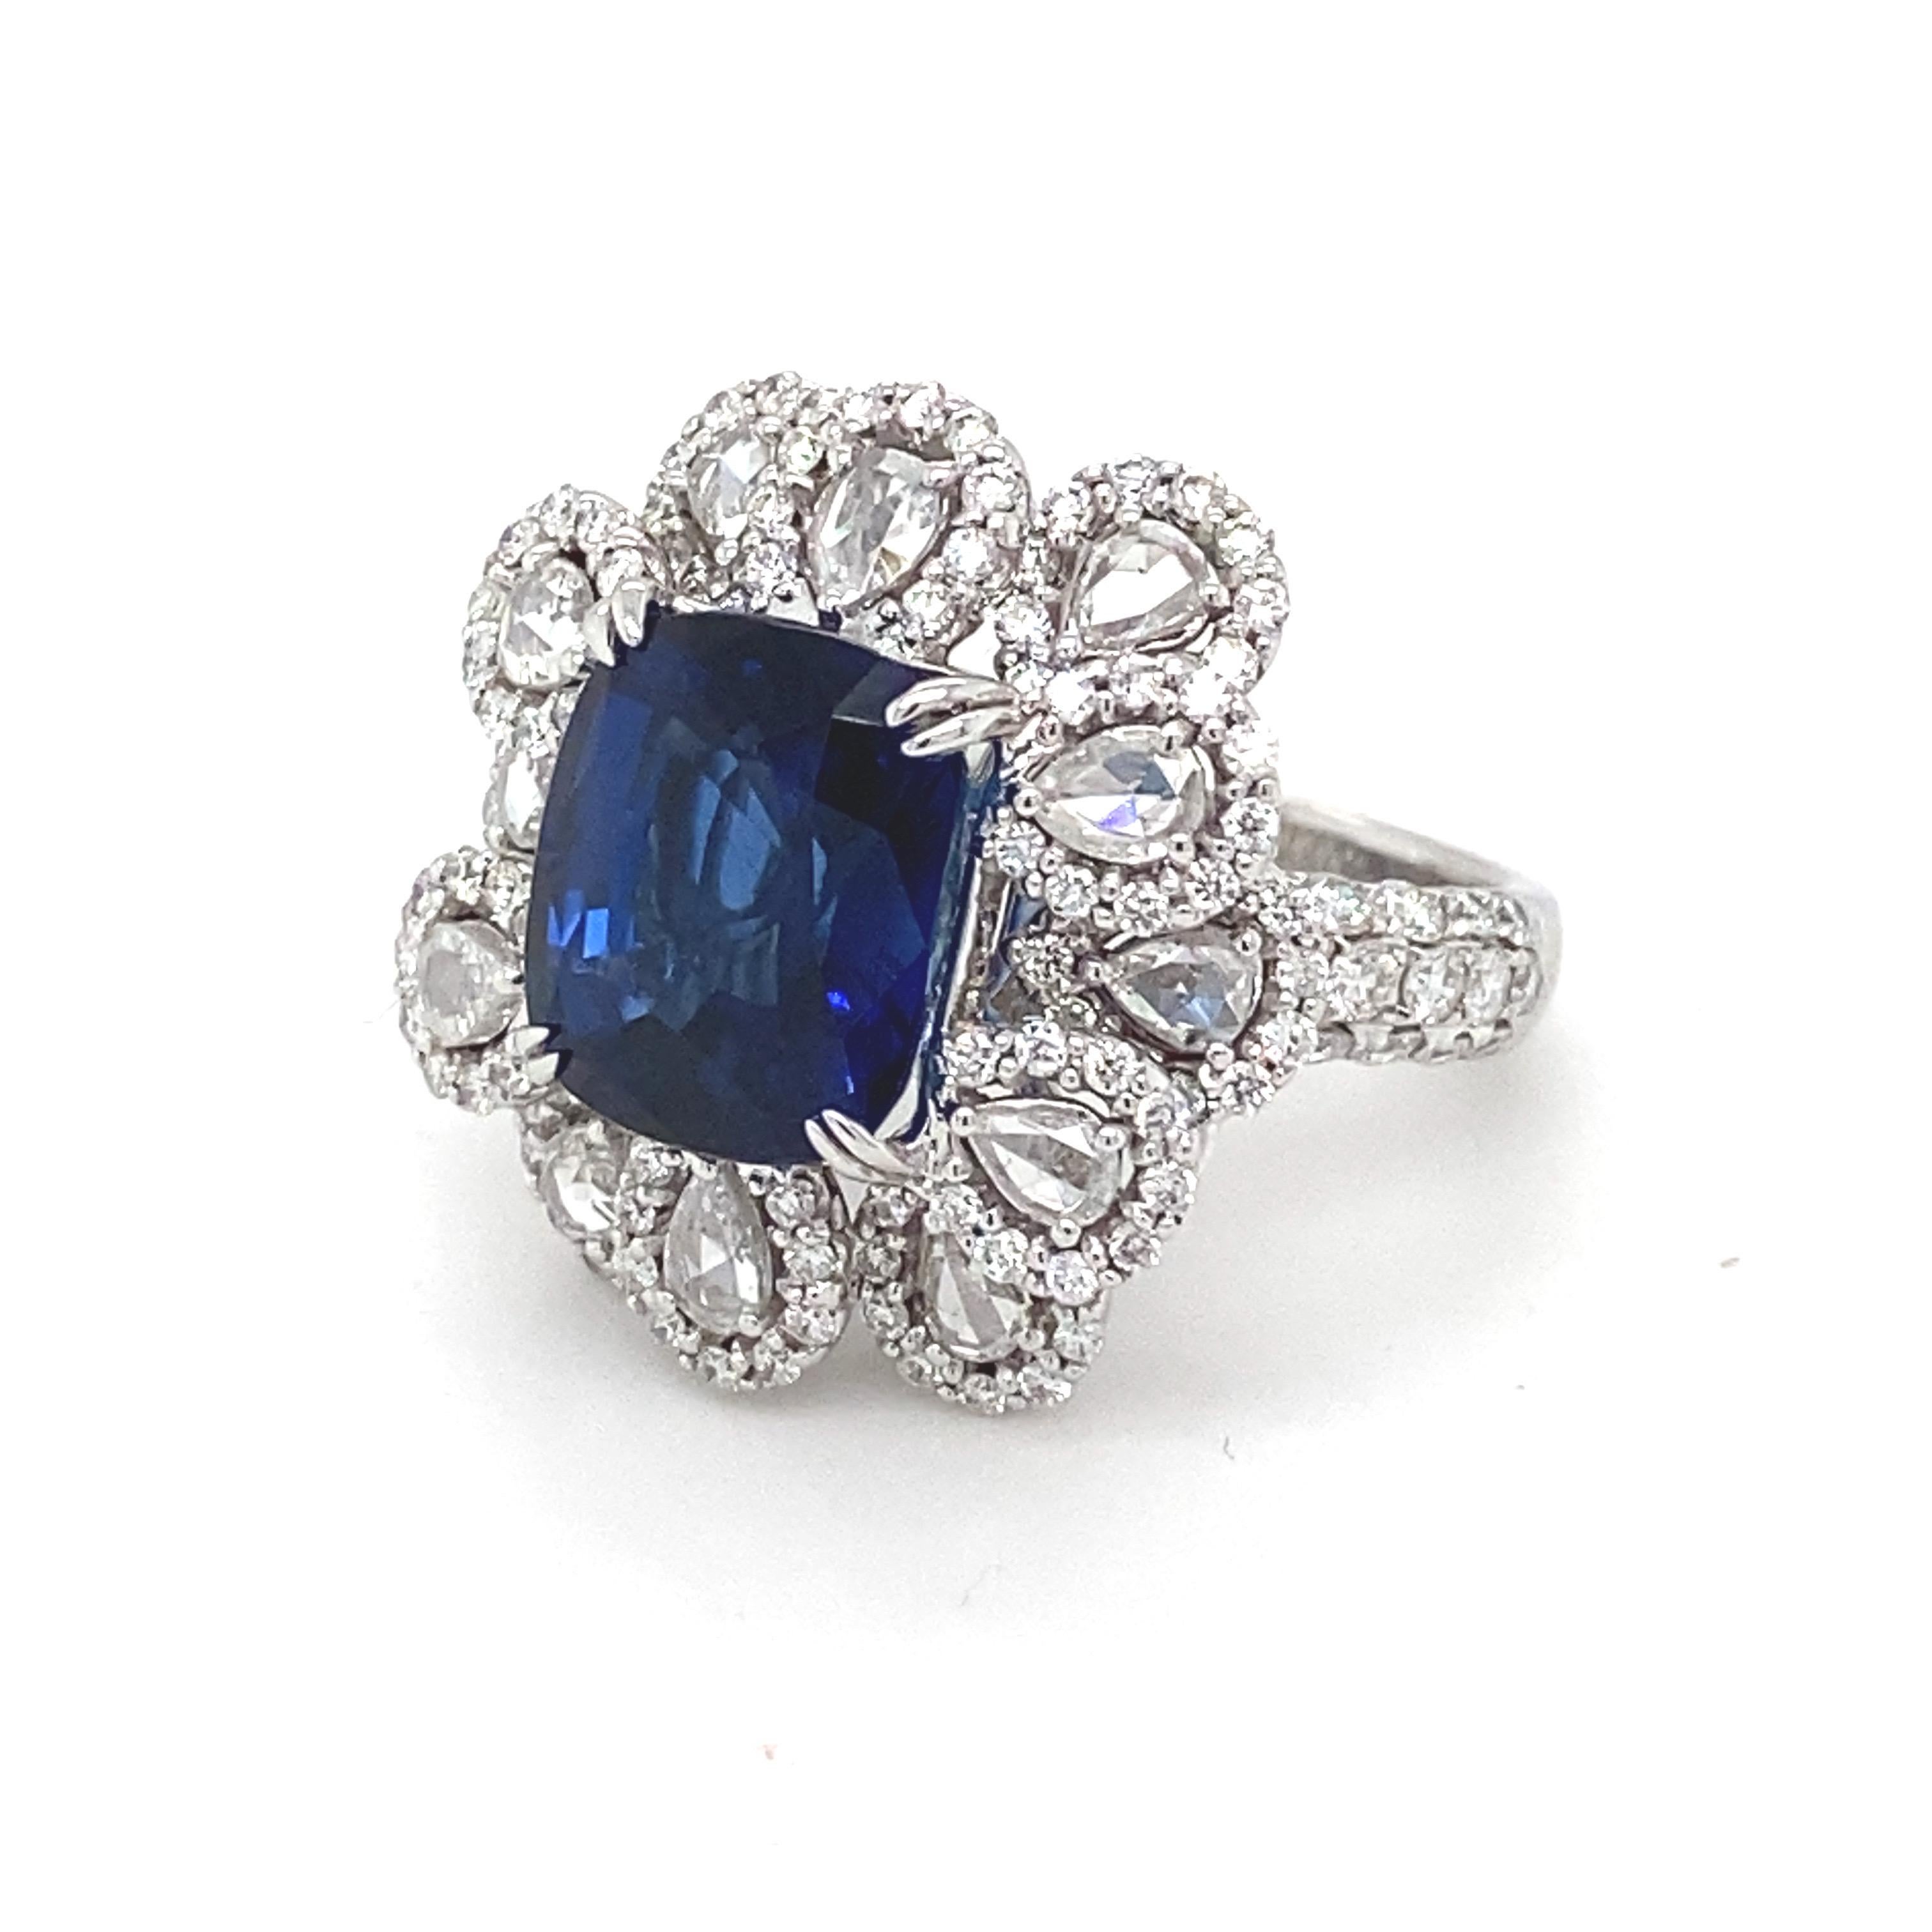 GIA Certified 7.87 Carat Cushion Shape Blue Sapphire Diamond 18K Engagement Ring For Sale 10